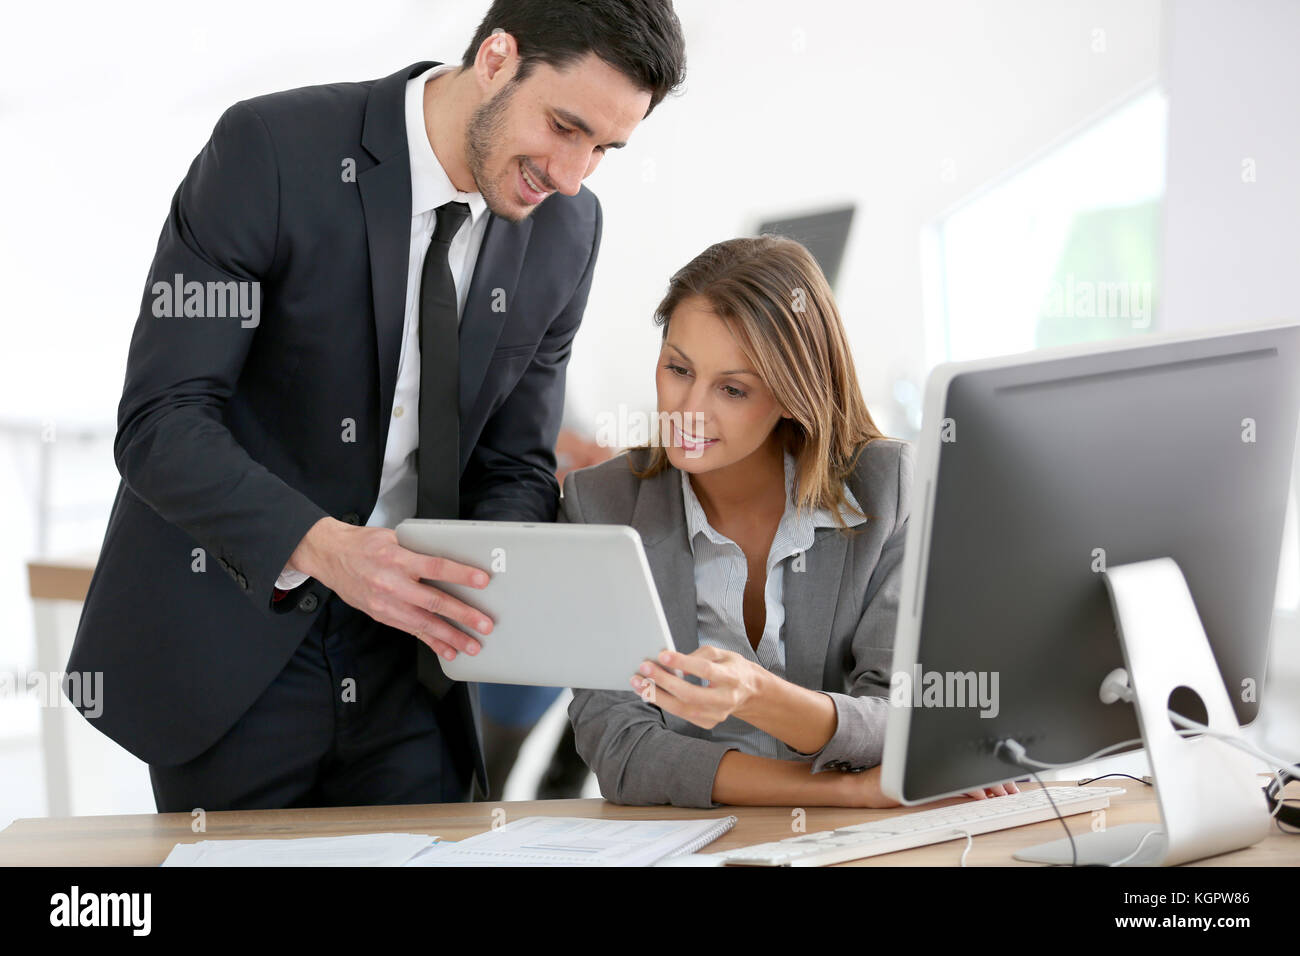 Business people working on tablet Banque D'Images